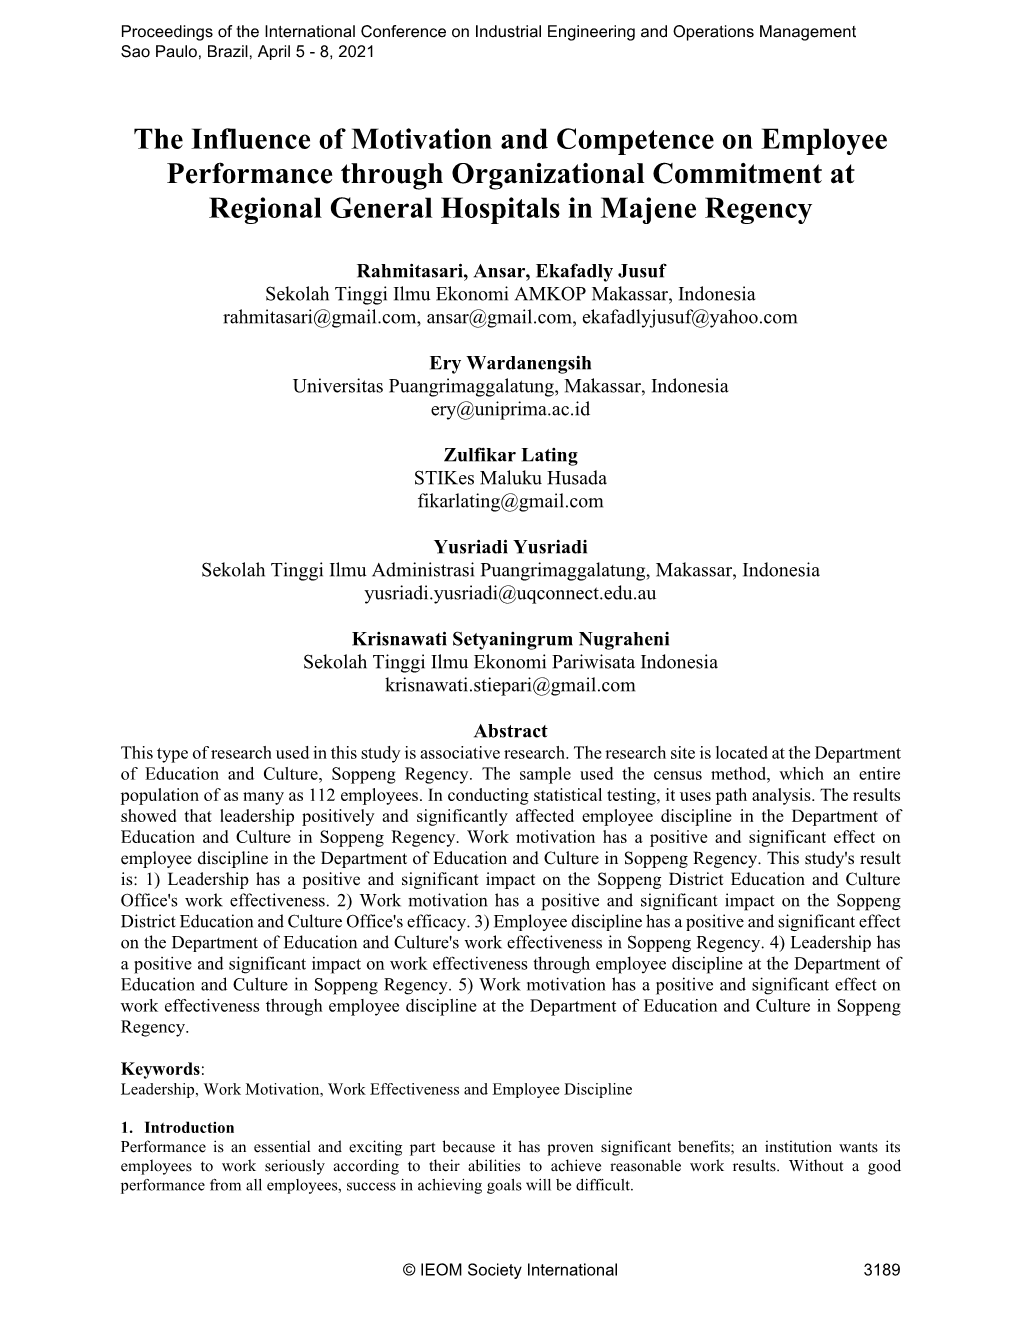 The Influence of Motivation and Competence on Employee Performance Through Organizational Commitment at Regional General Hospitals in Majene Regency